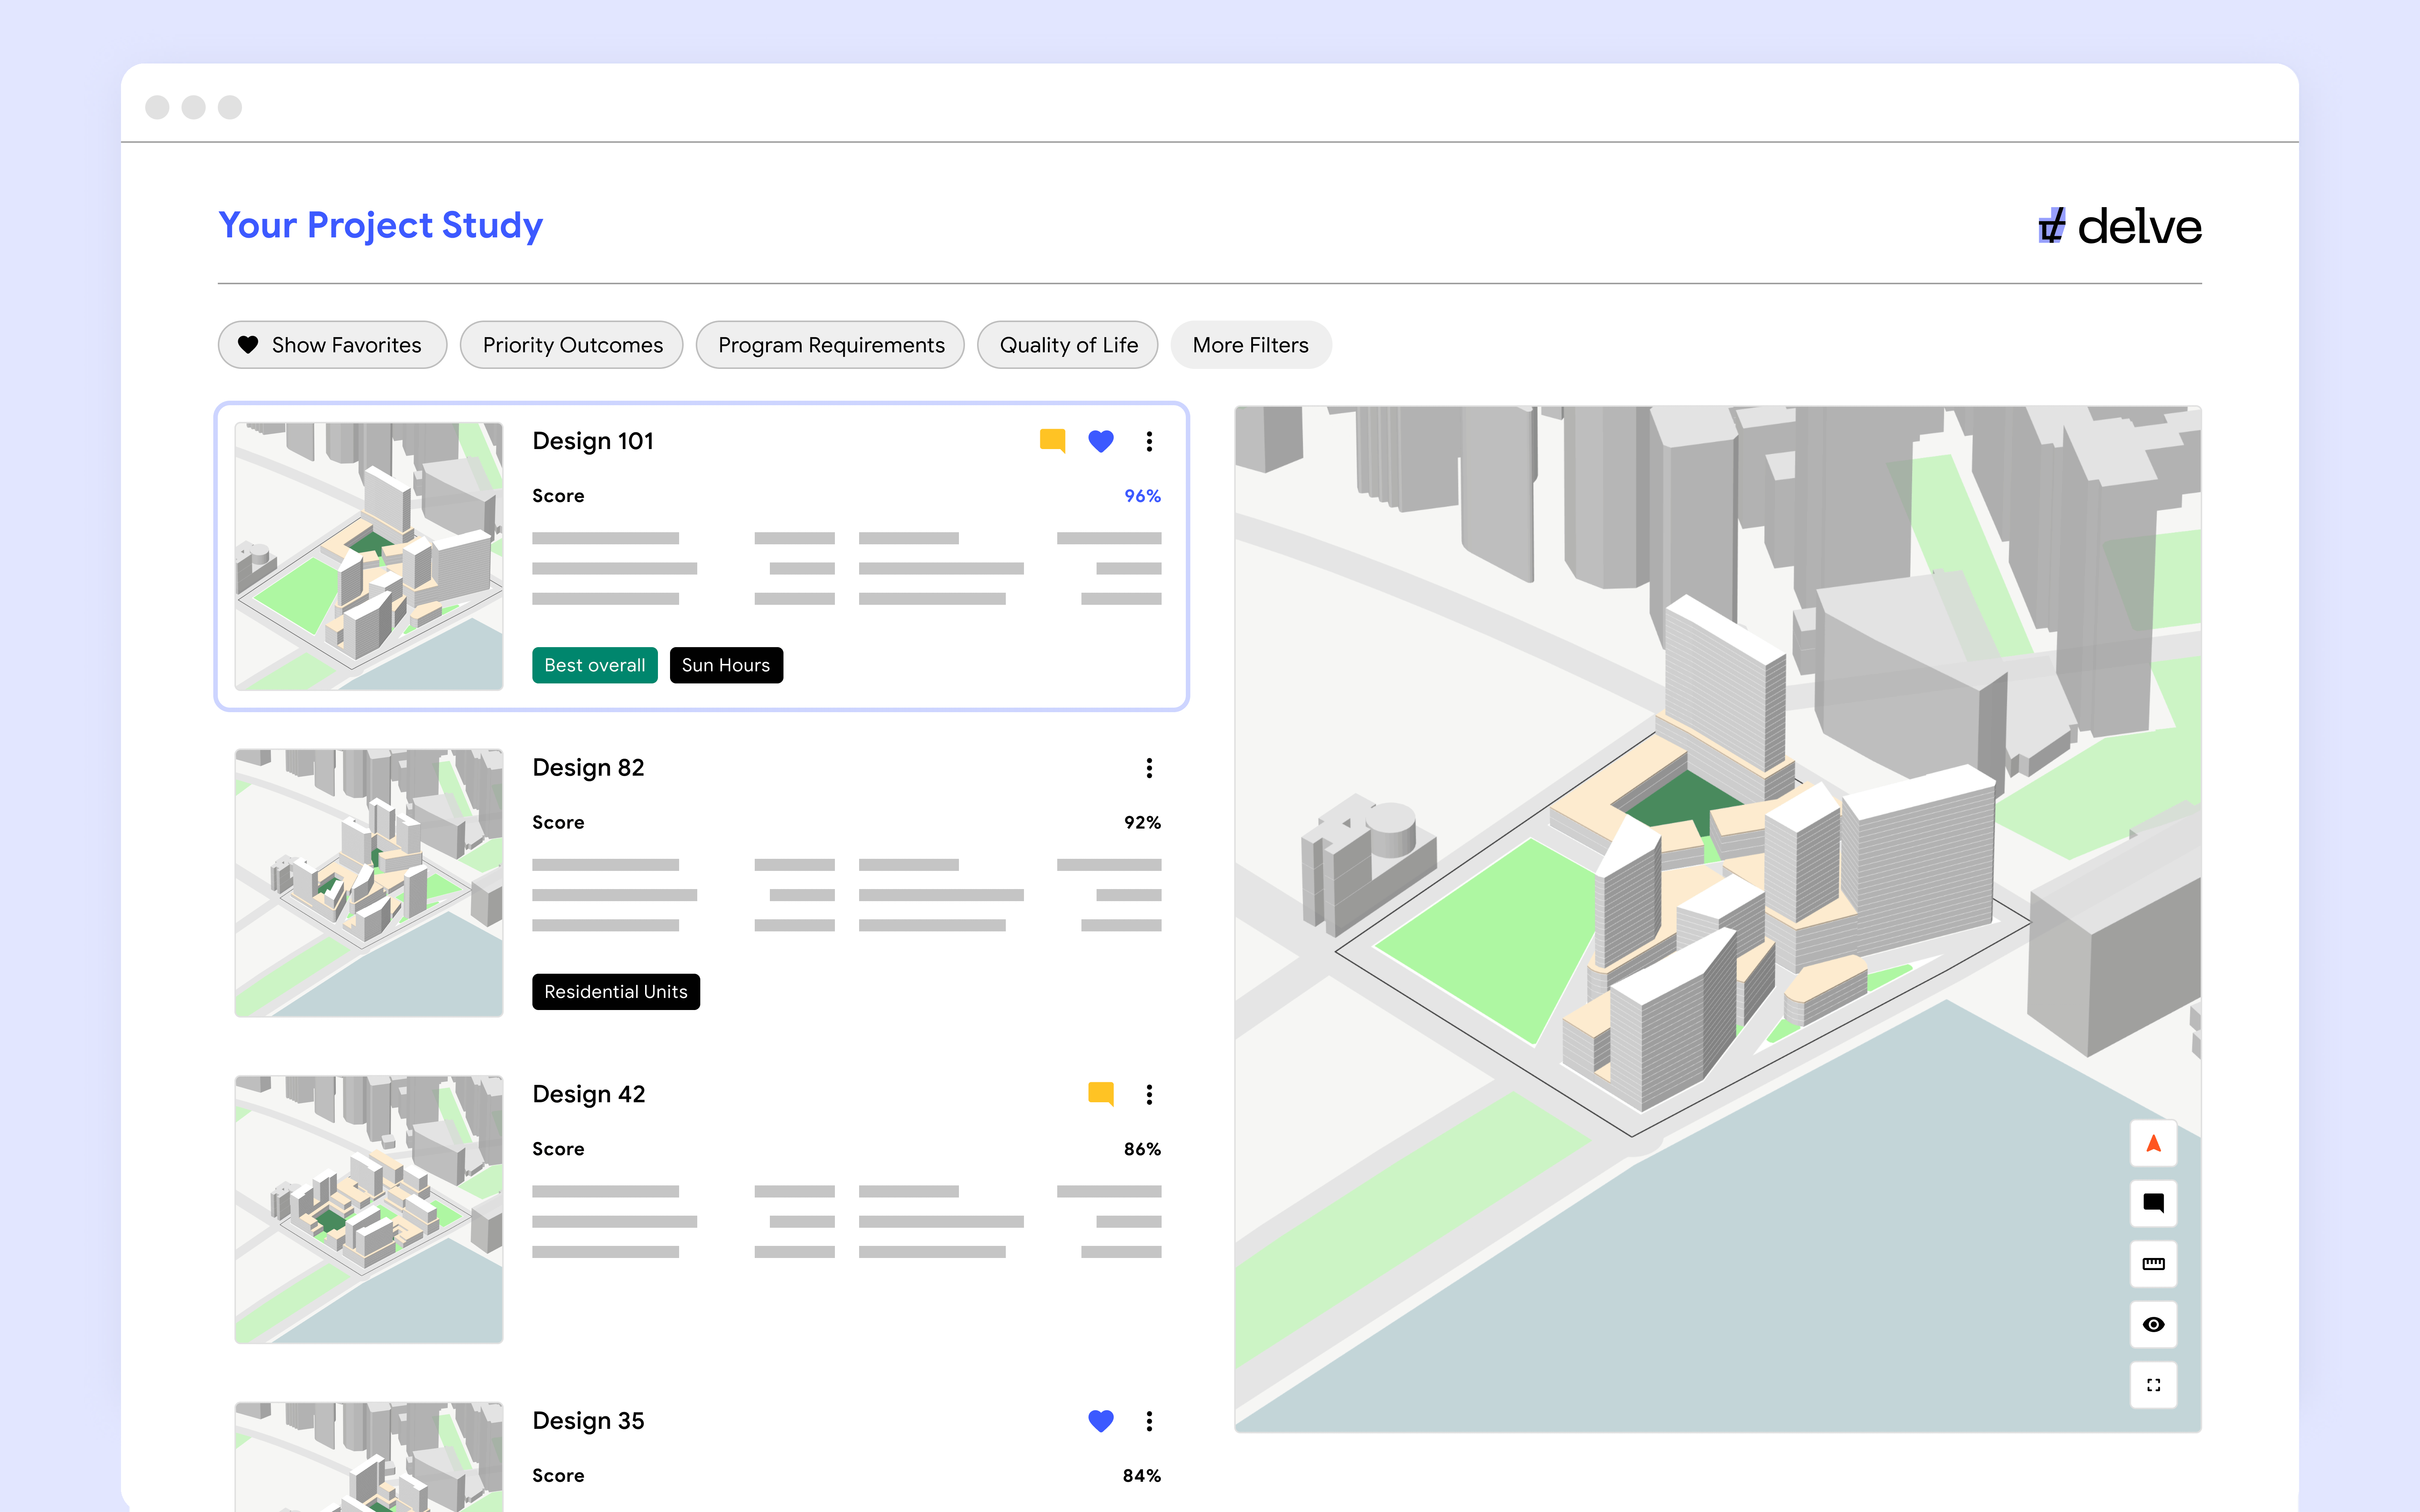 A screenshot of the Delve product showing neighborhood design options and outcome scores.